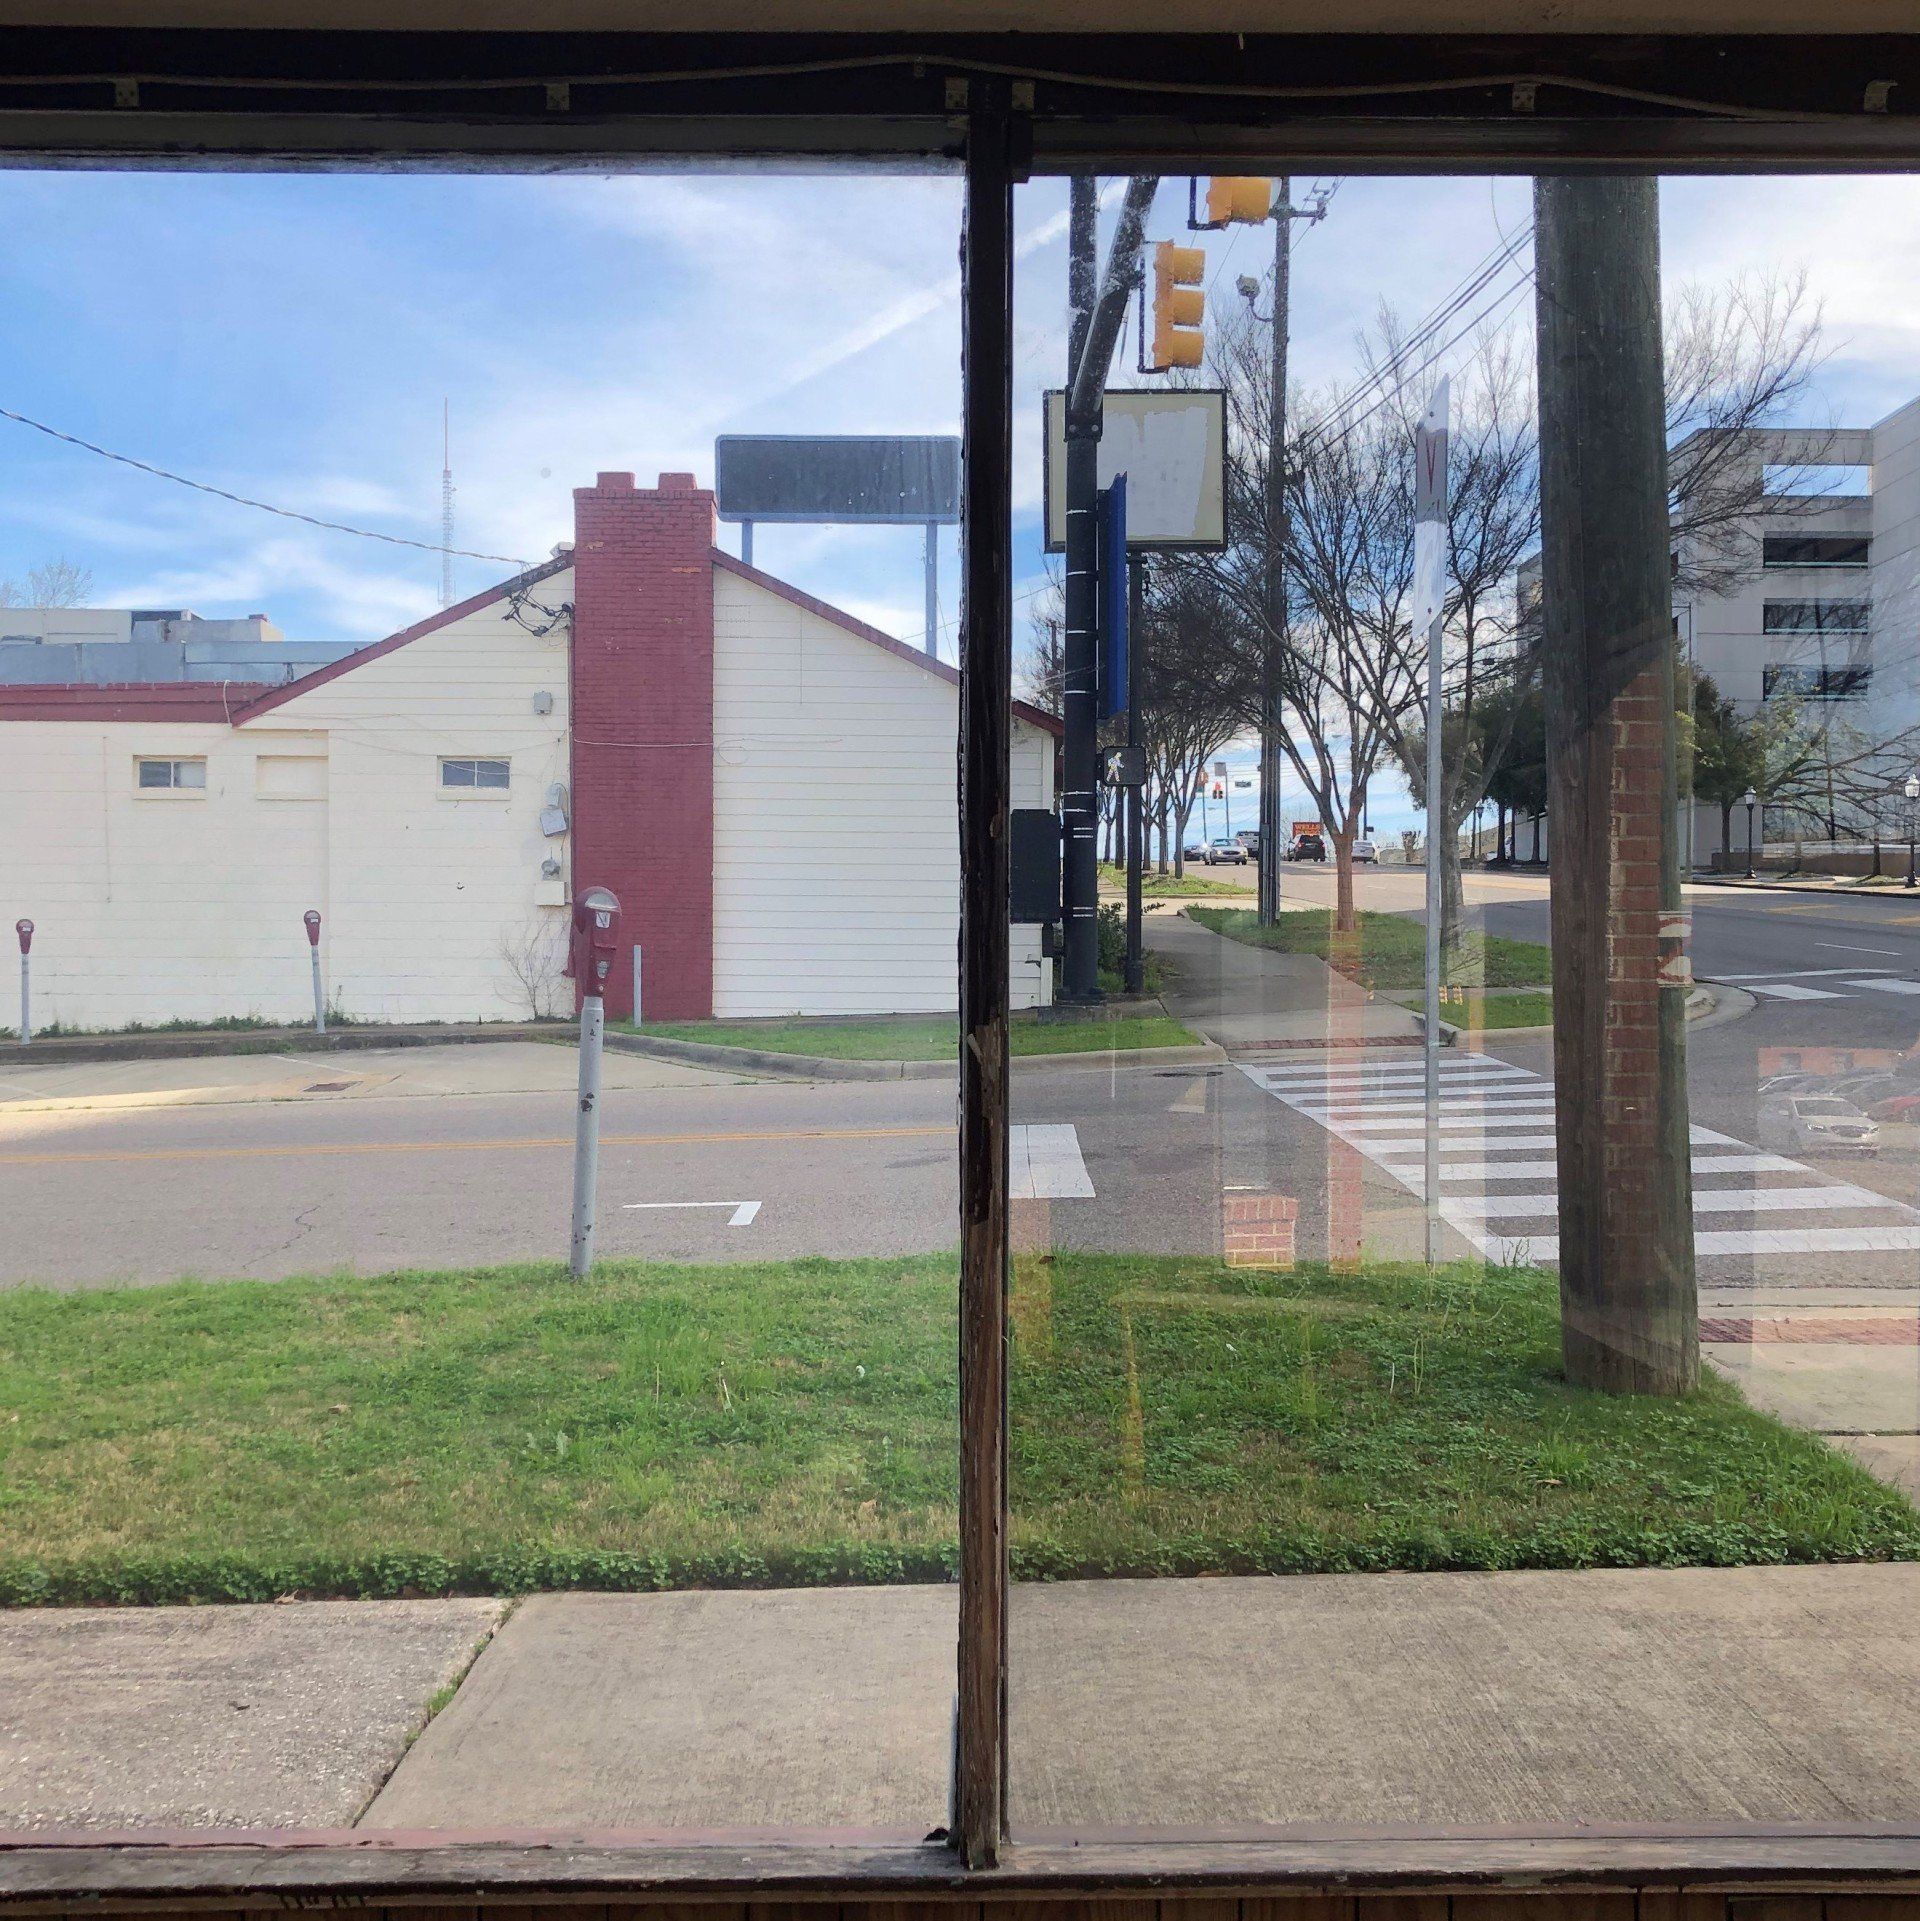 Tint removal and replacement - looking out window before old tint film was removed